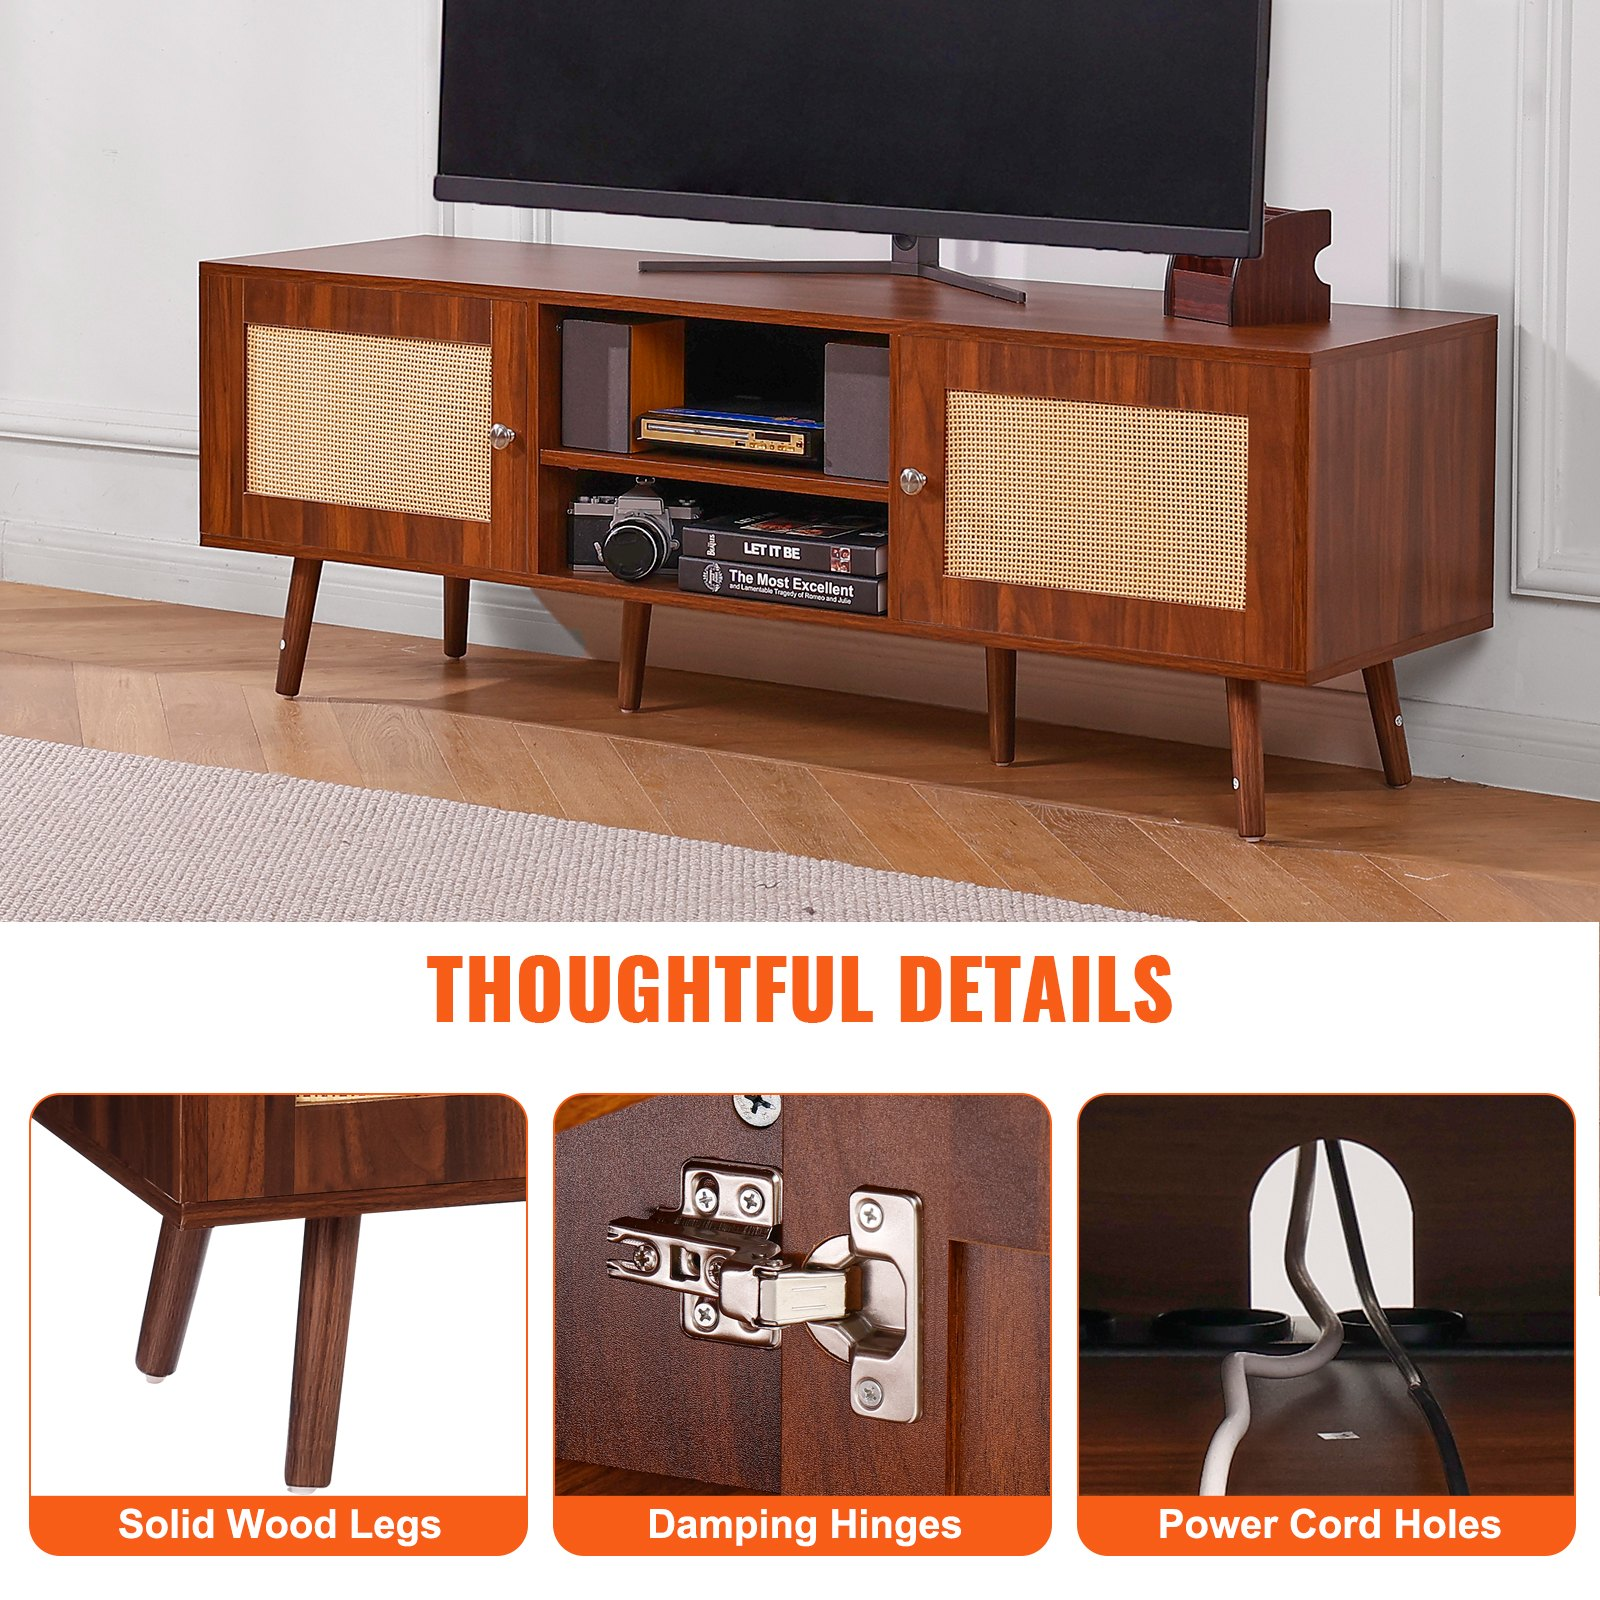 VEVOR Rattan TV Stand, Mid Century Modern TV Stand for 65 inch TV, Boho Rattan TV Cabinet with Build-in Socket and USB Ports, Adjustable Shelfs for Living Room, Media Room, Walnut, Goodies N Stuff